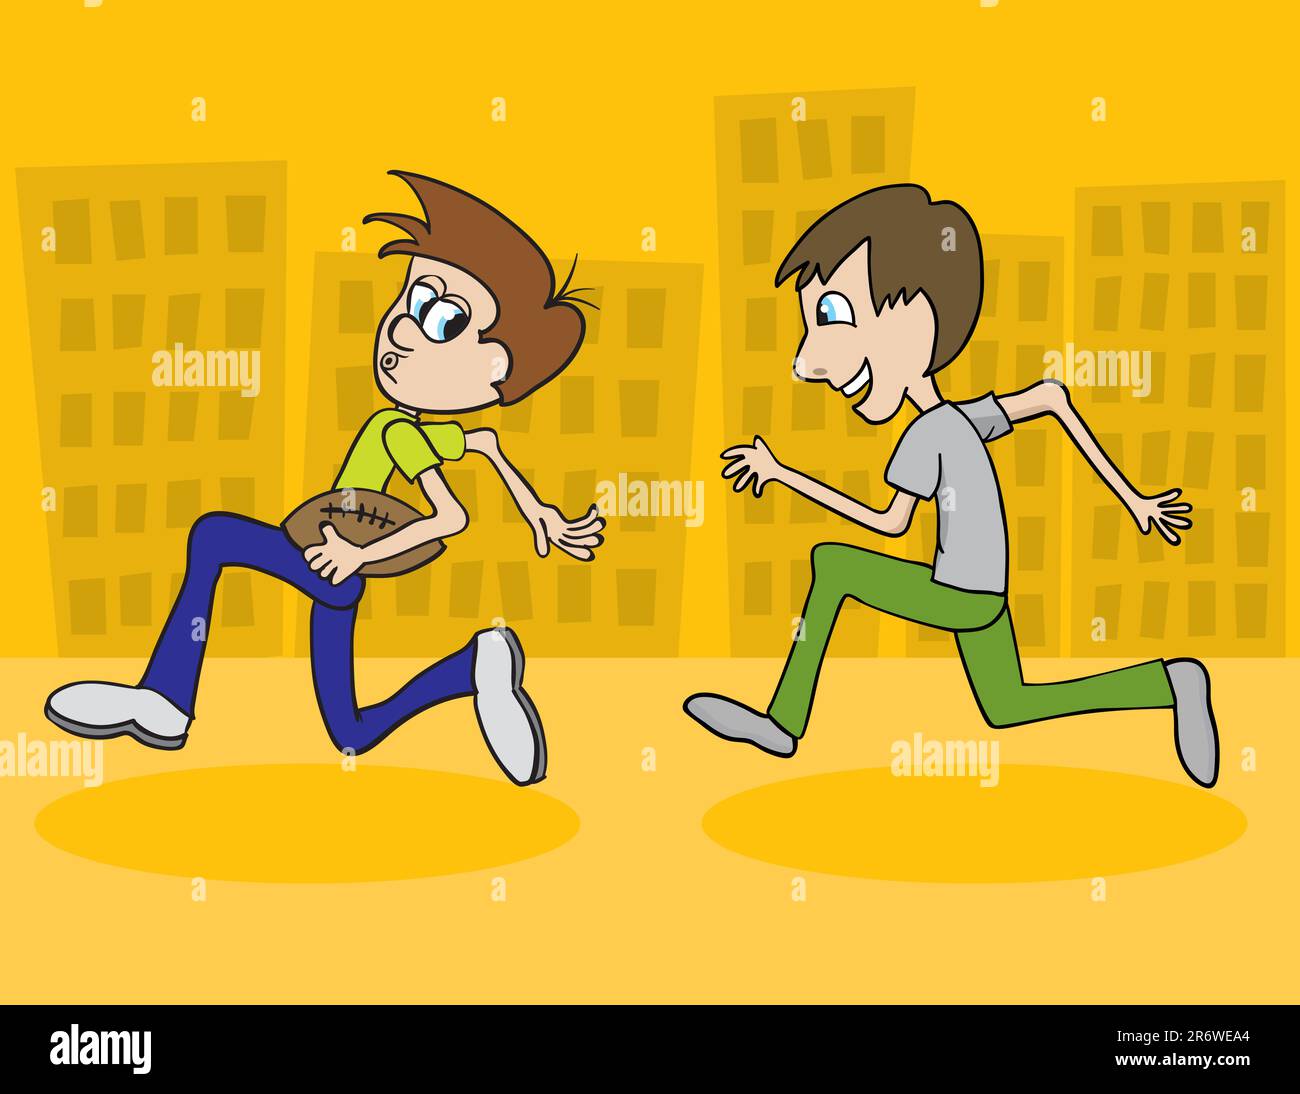 Illustration of two boys playing football. Stock Vector